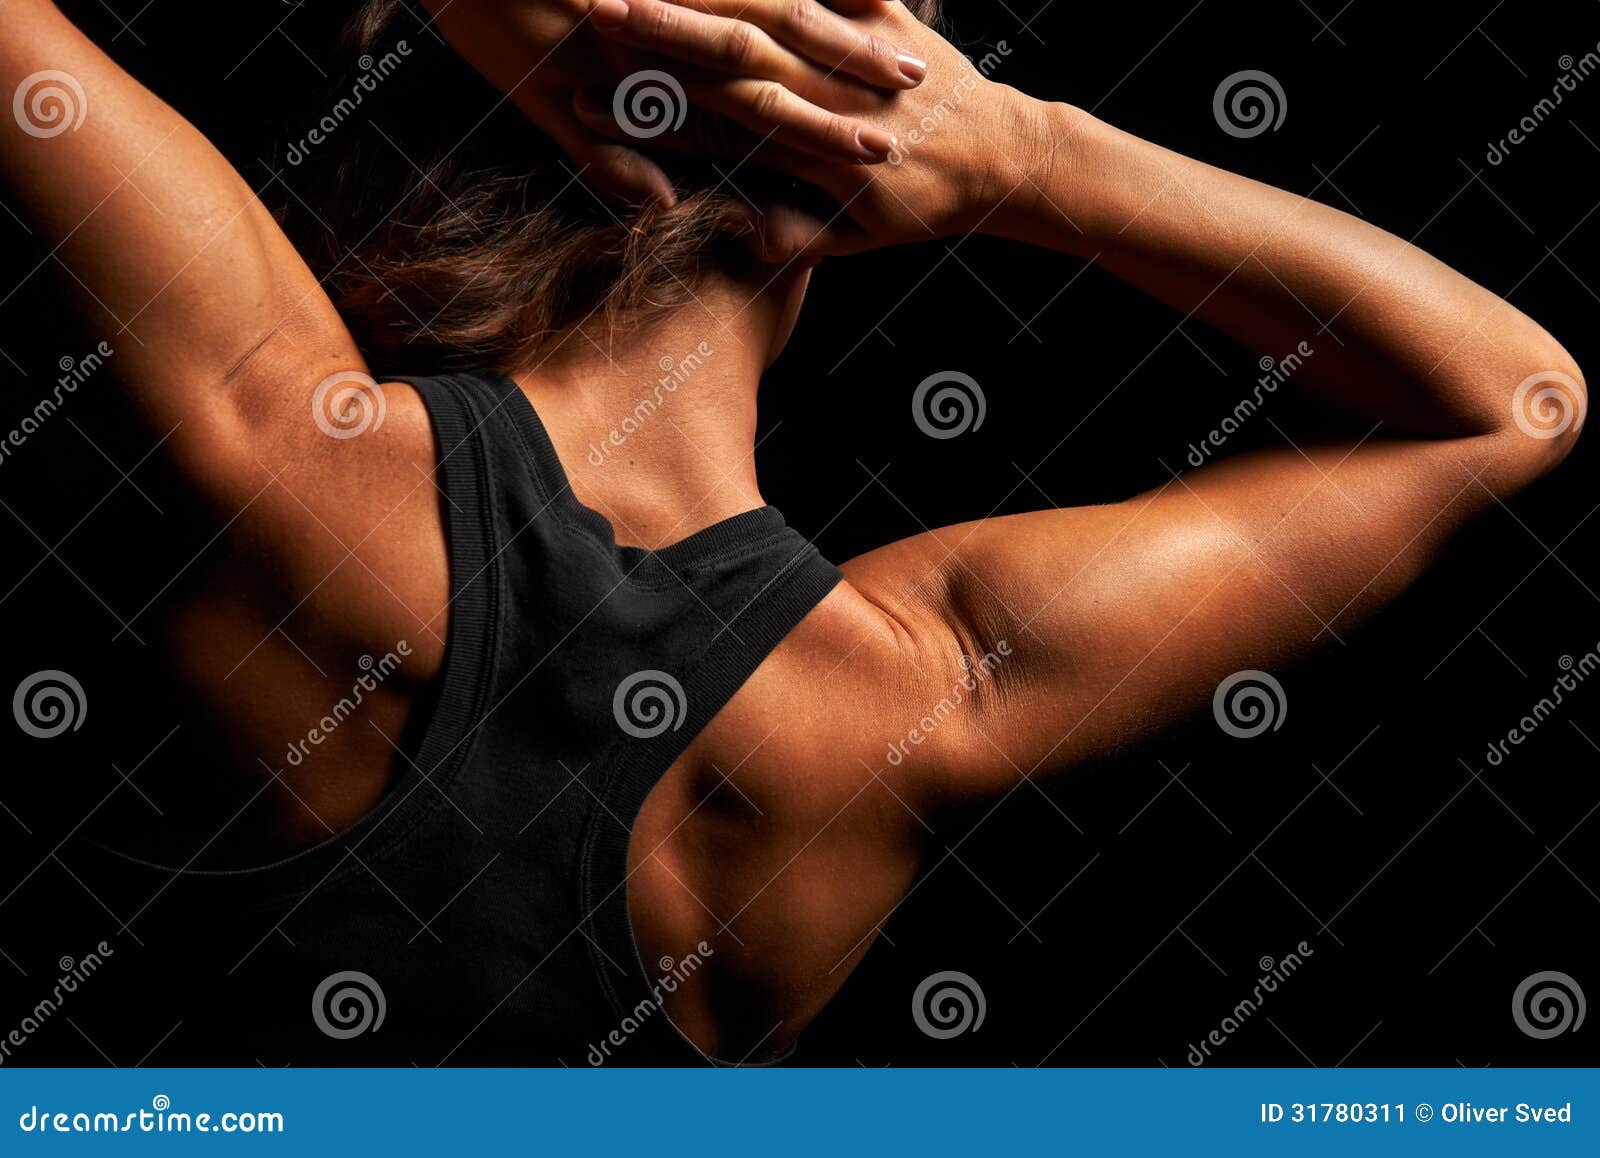 Woman muscular back stock image. Image of rear, female - 30062293